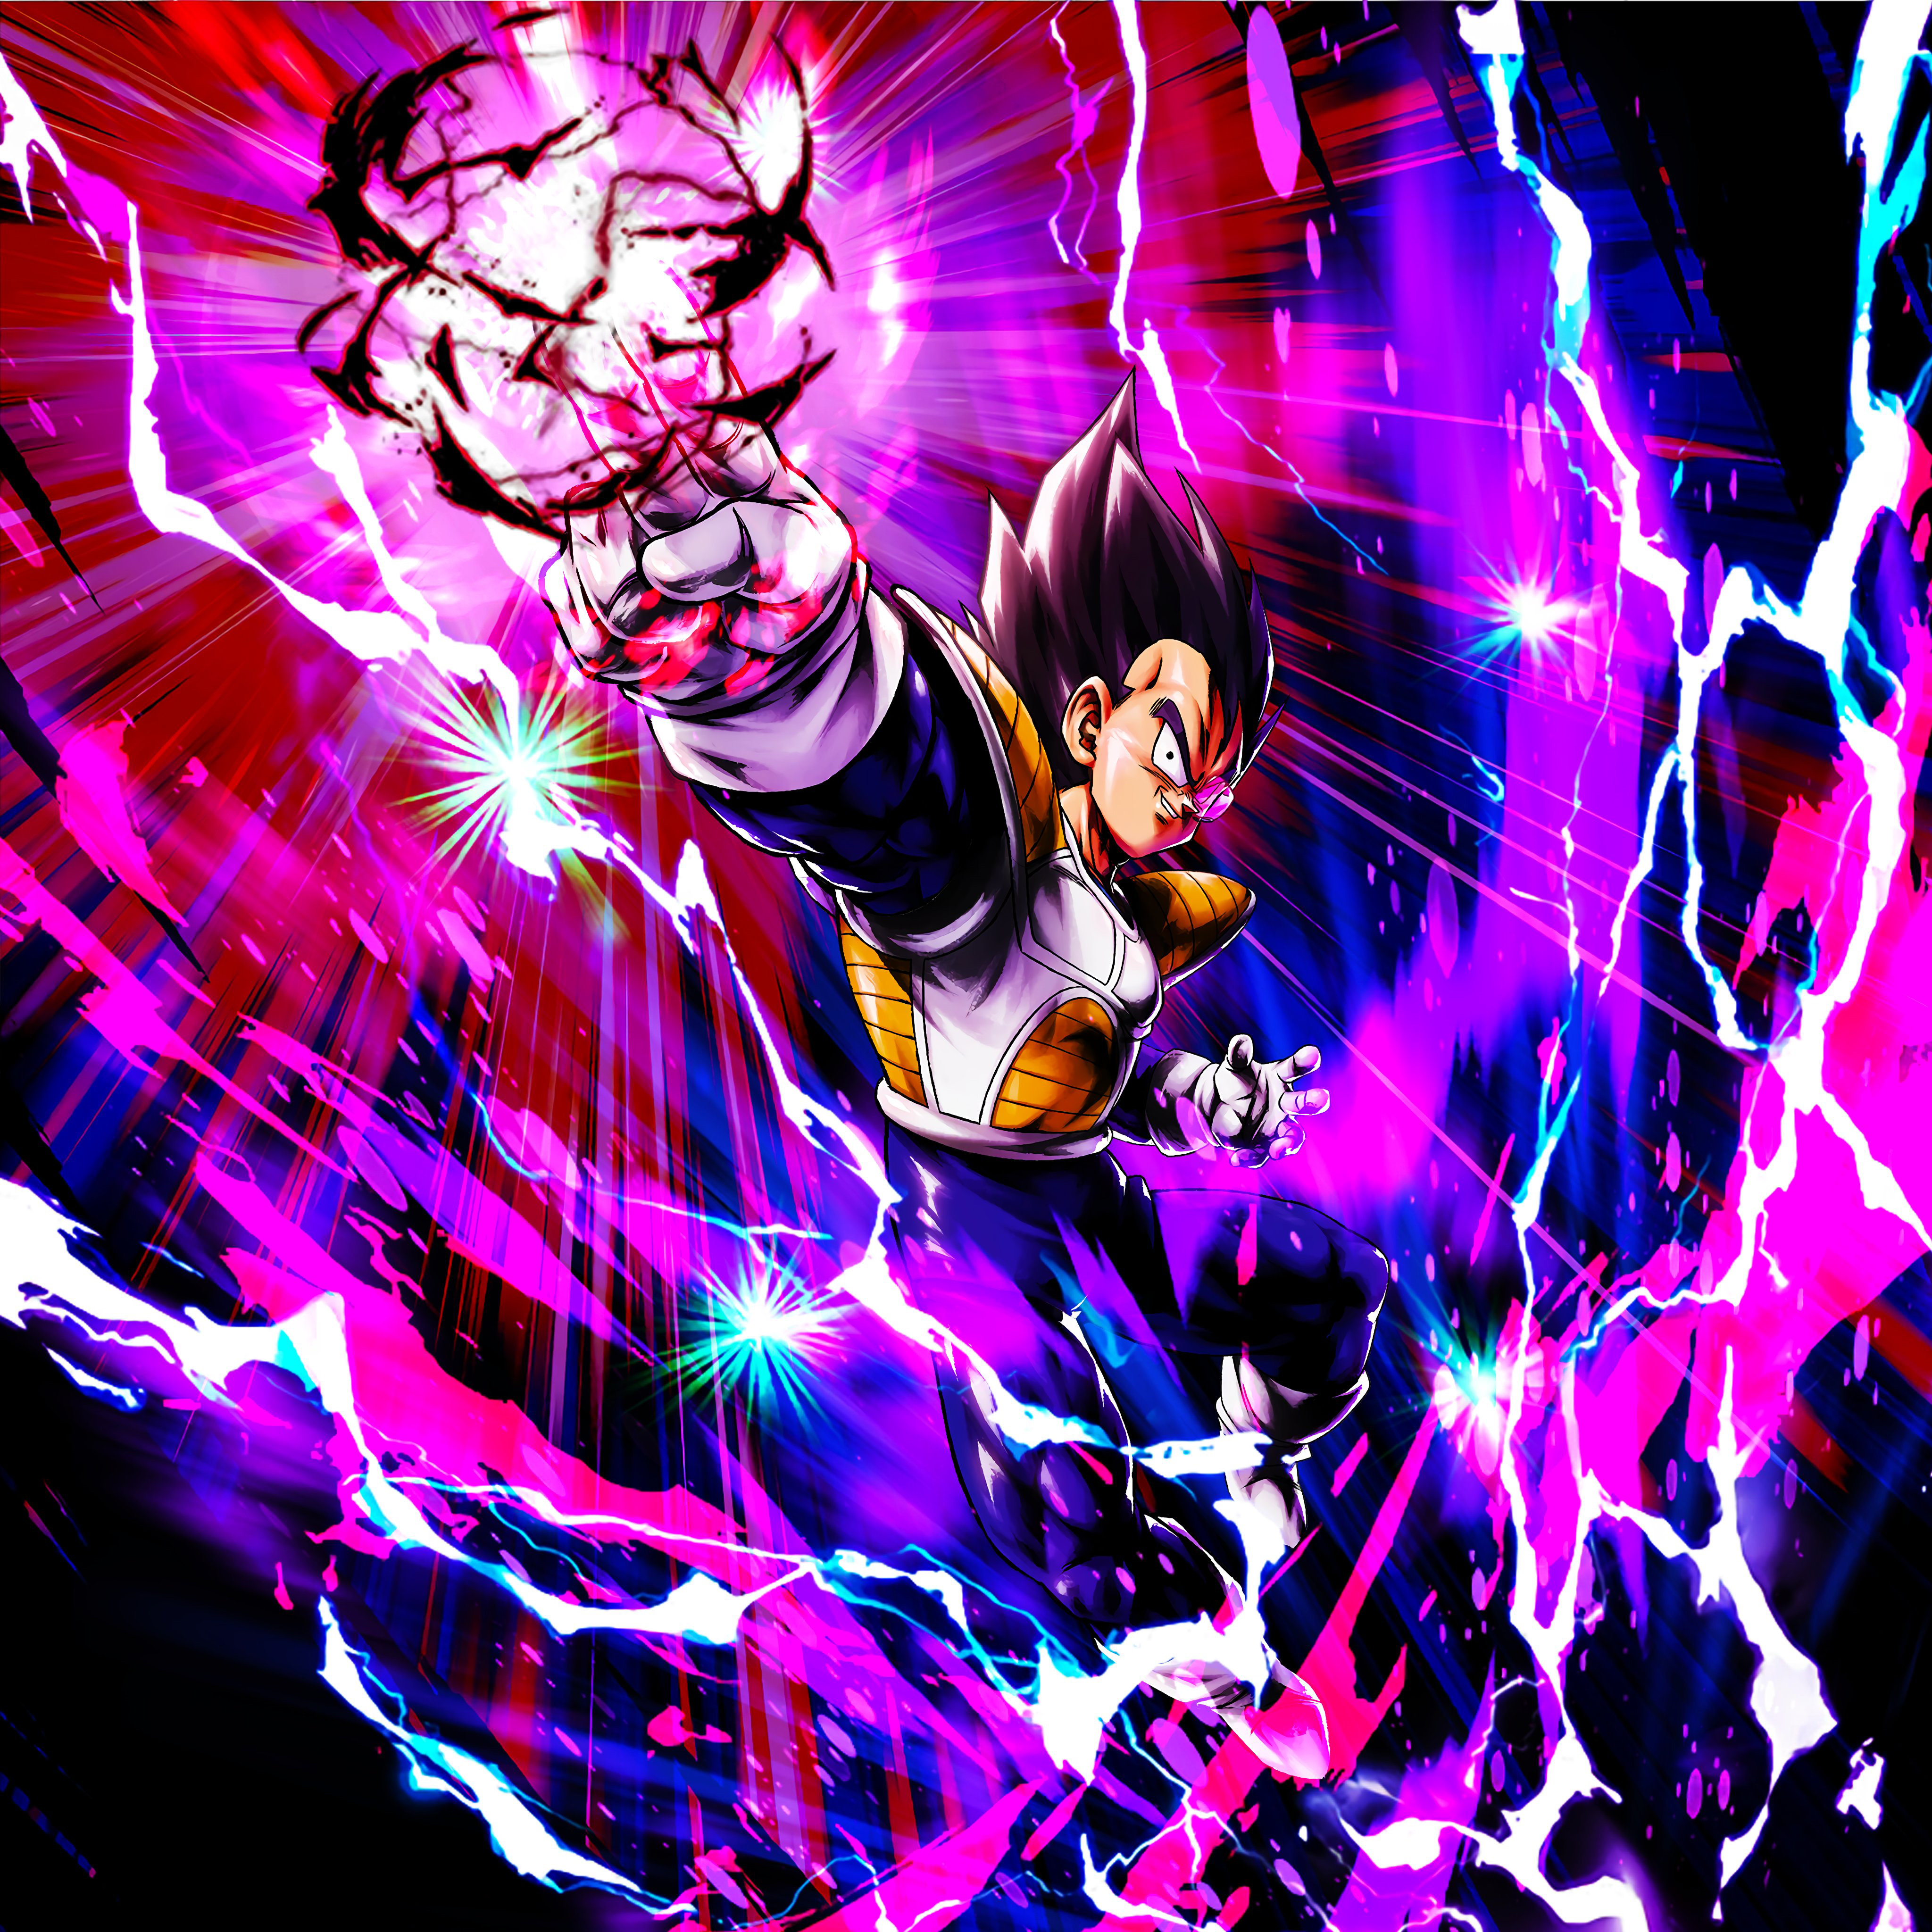 Dragon Ball Legends Vegeta avatar with dynamic lightning effects, perfect as a profile picture for gamers and anime fans.